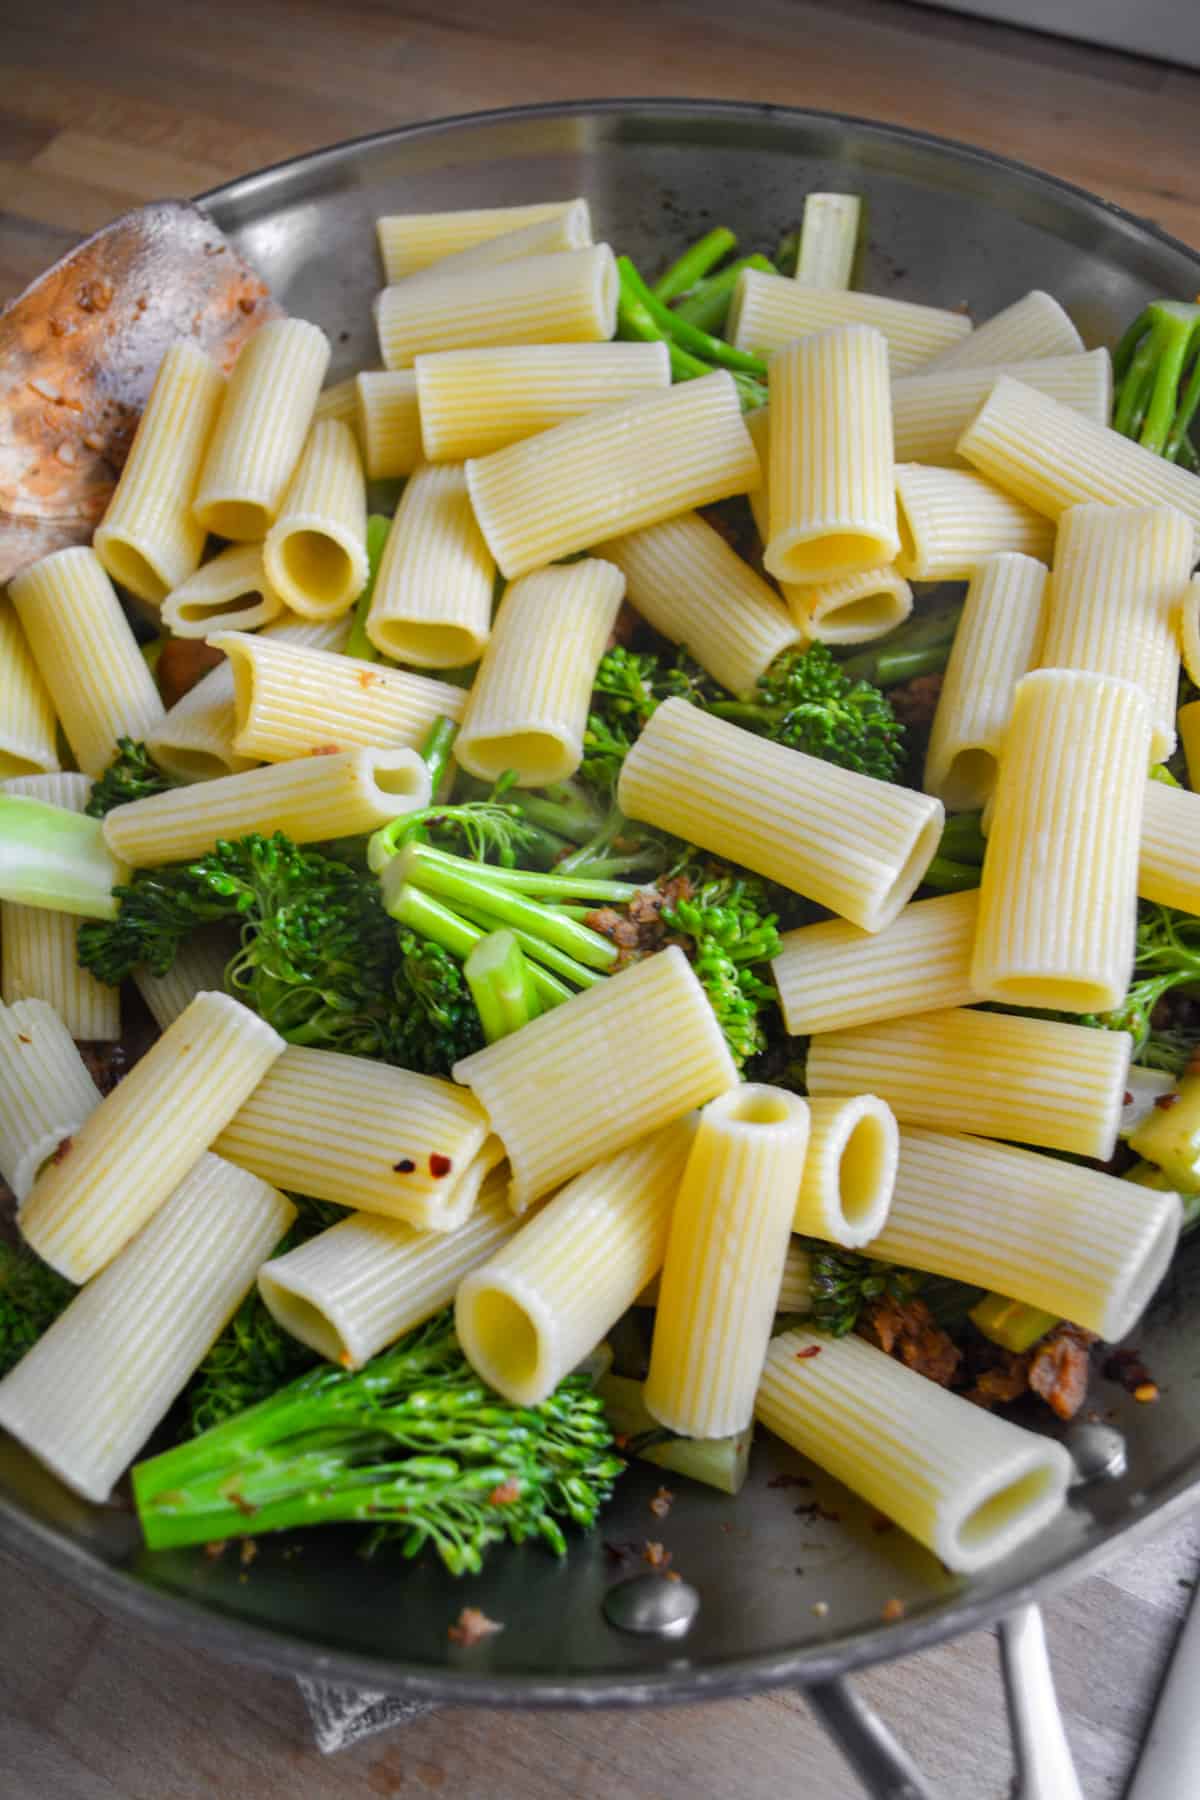 Pasta added into the pan with the broccolini and vegan sausage.